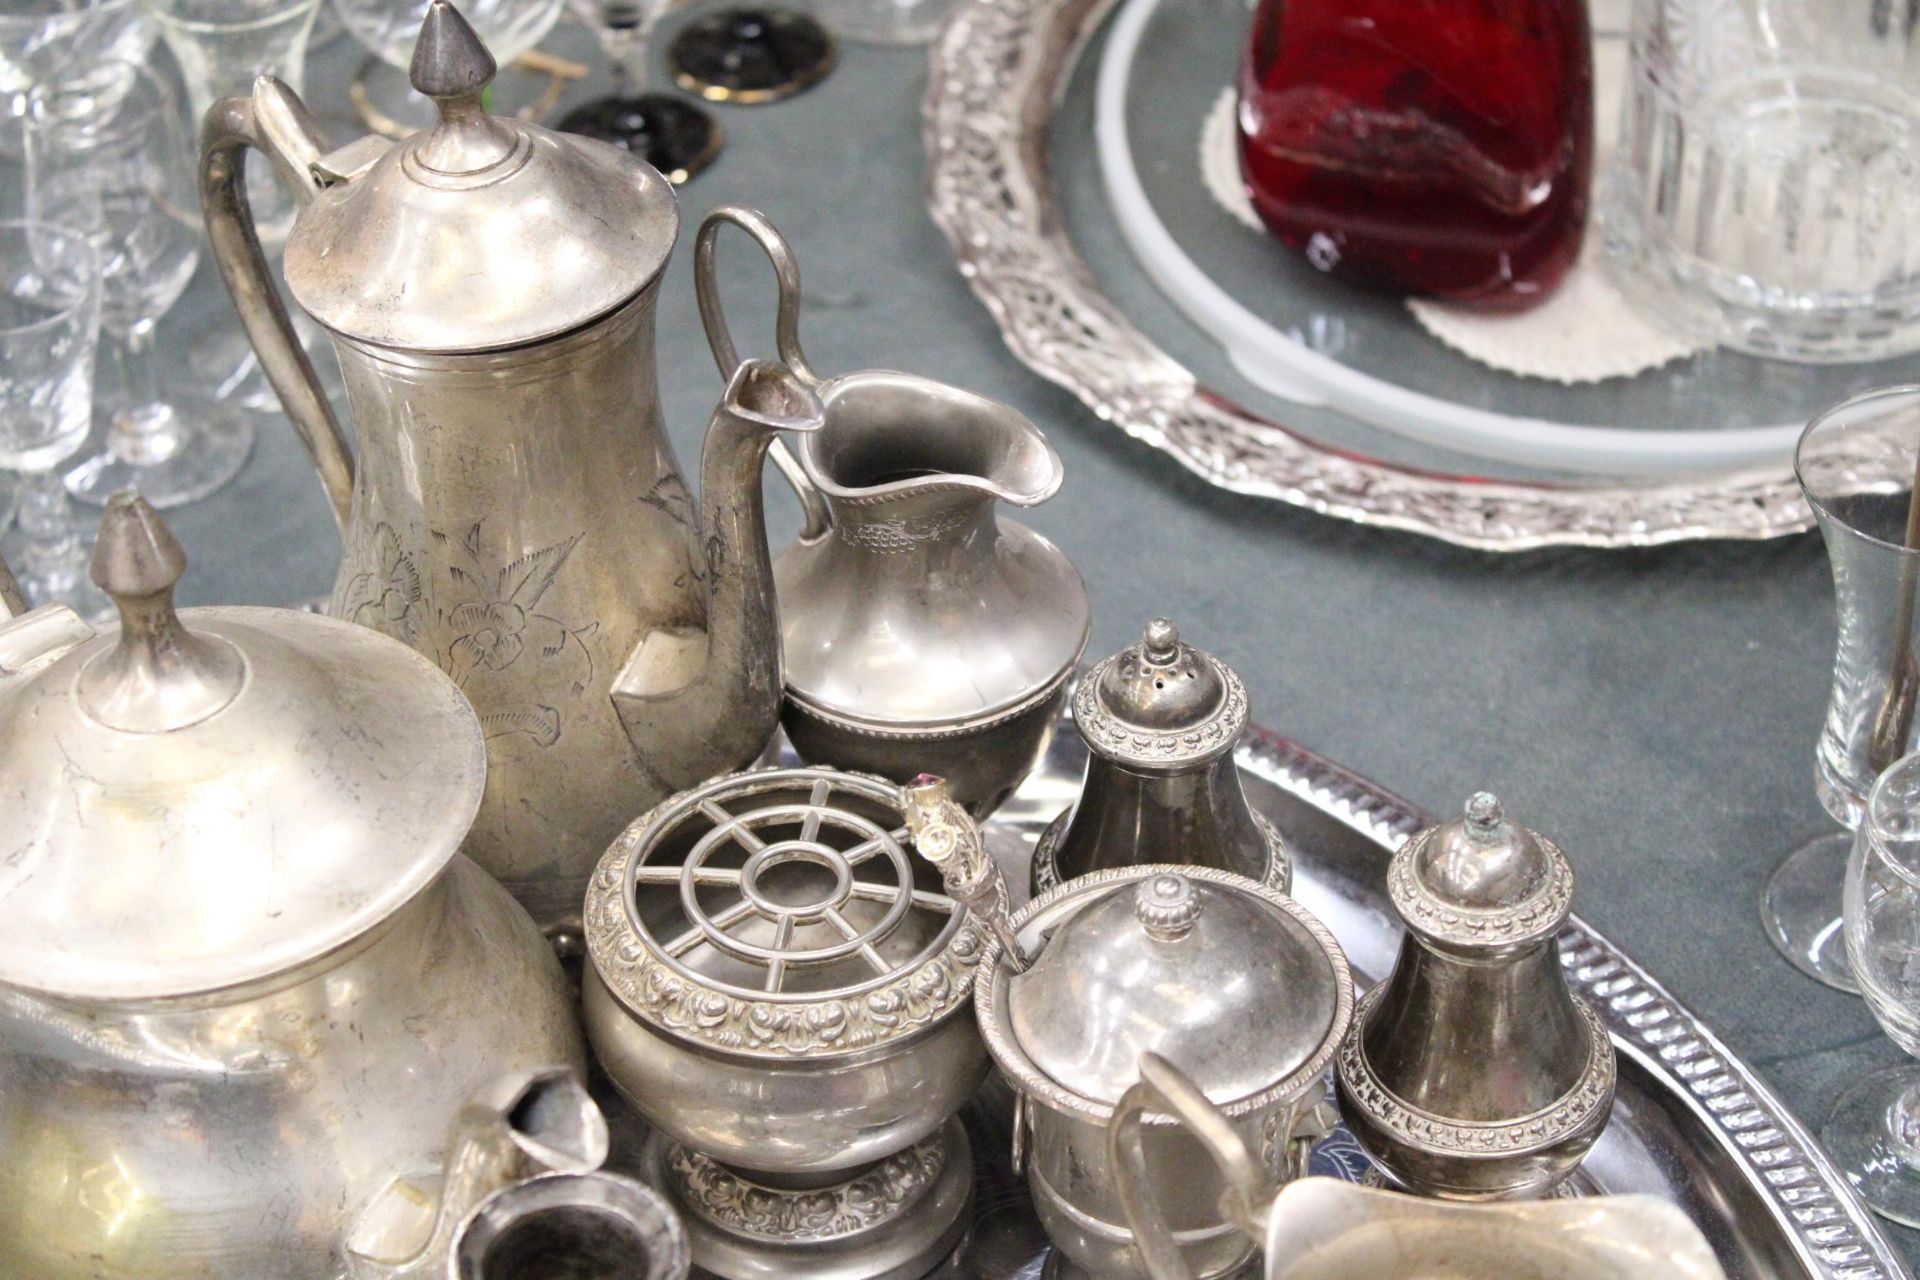 A QUANTITY OF SILVER PLATED ITEMS TO INCLUDE, A TRAY, TEAPOT, COFFEE POT, CANDLESTICK, JUGS, A CRUET - Image 4 of 6